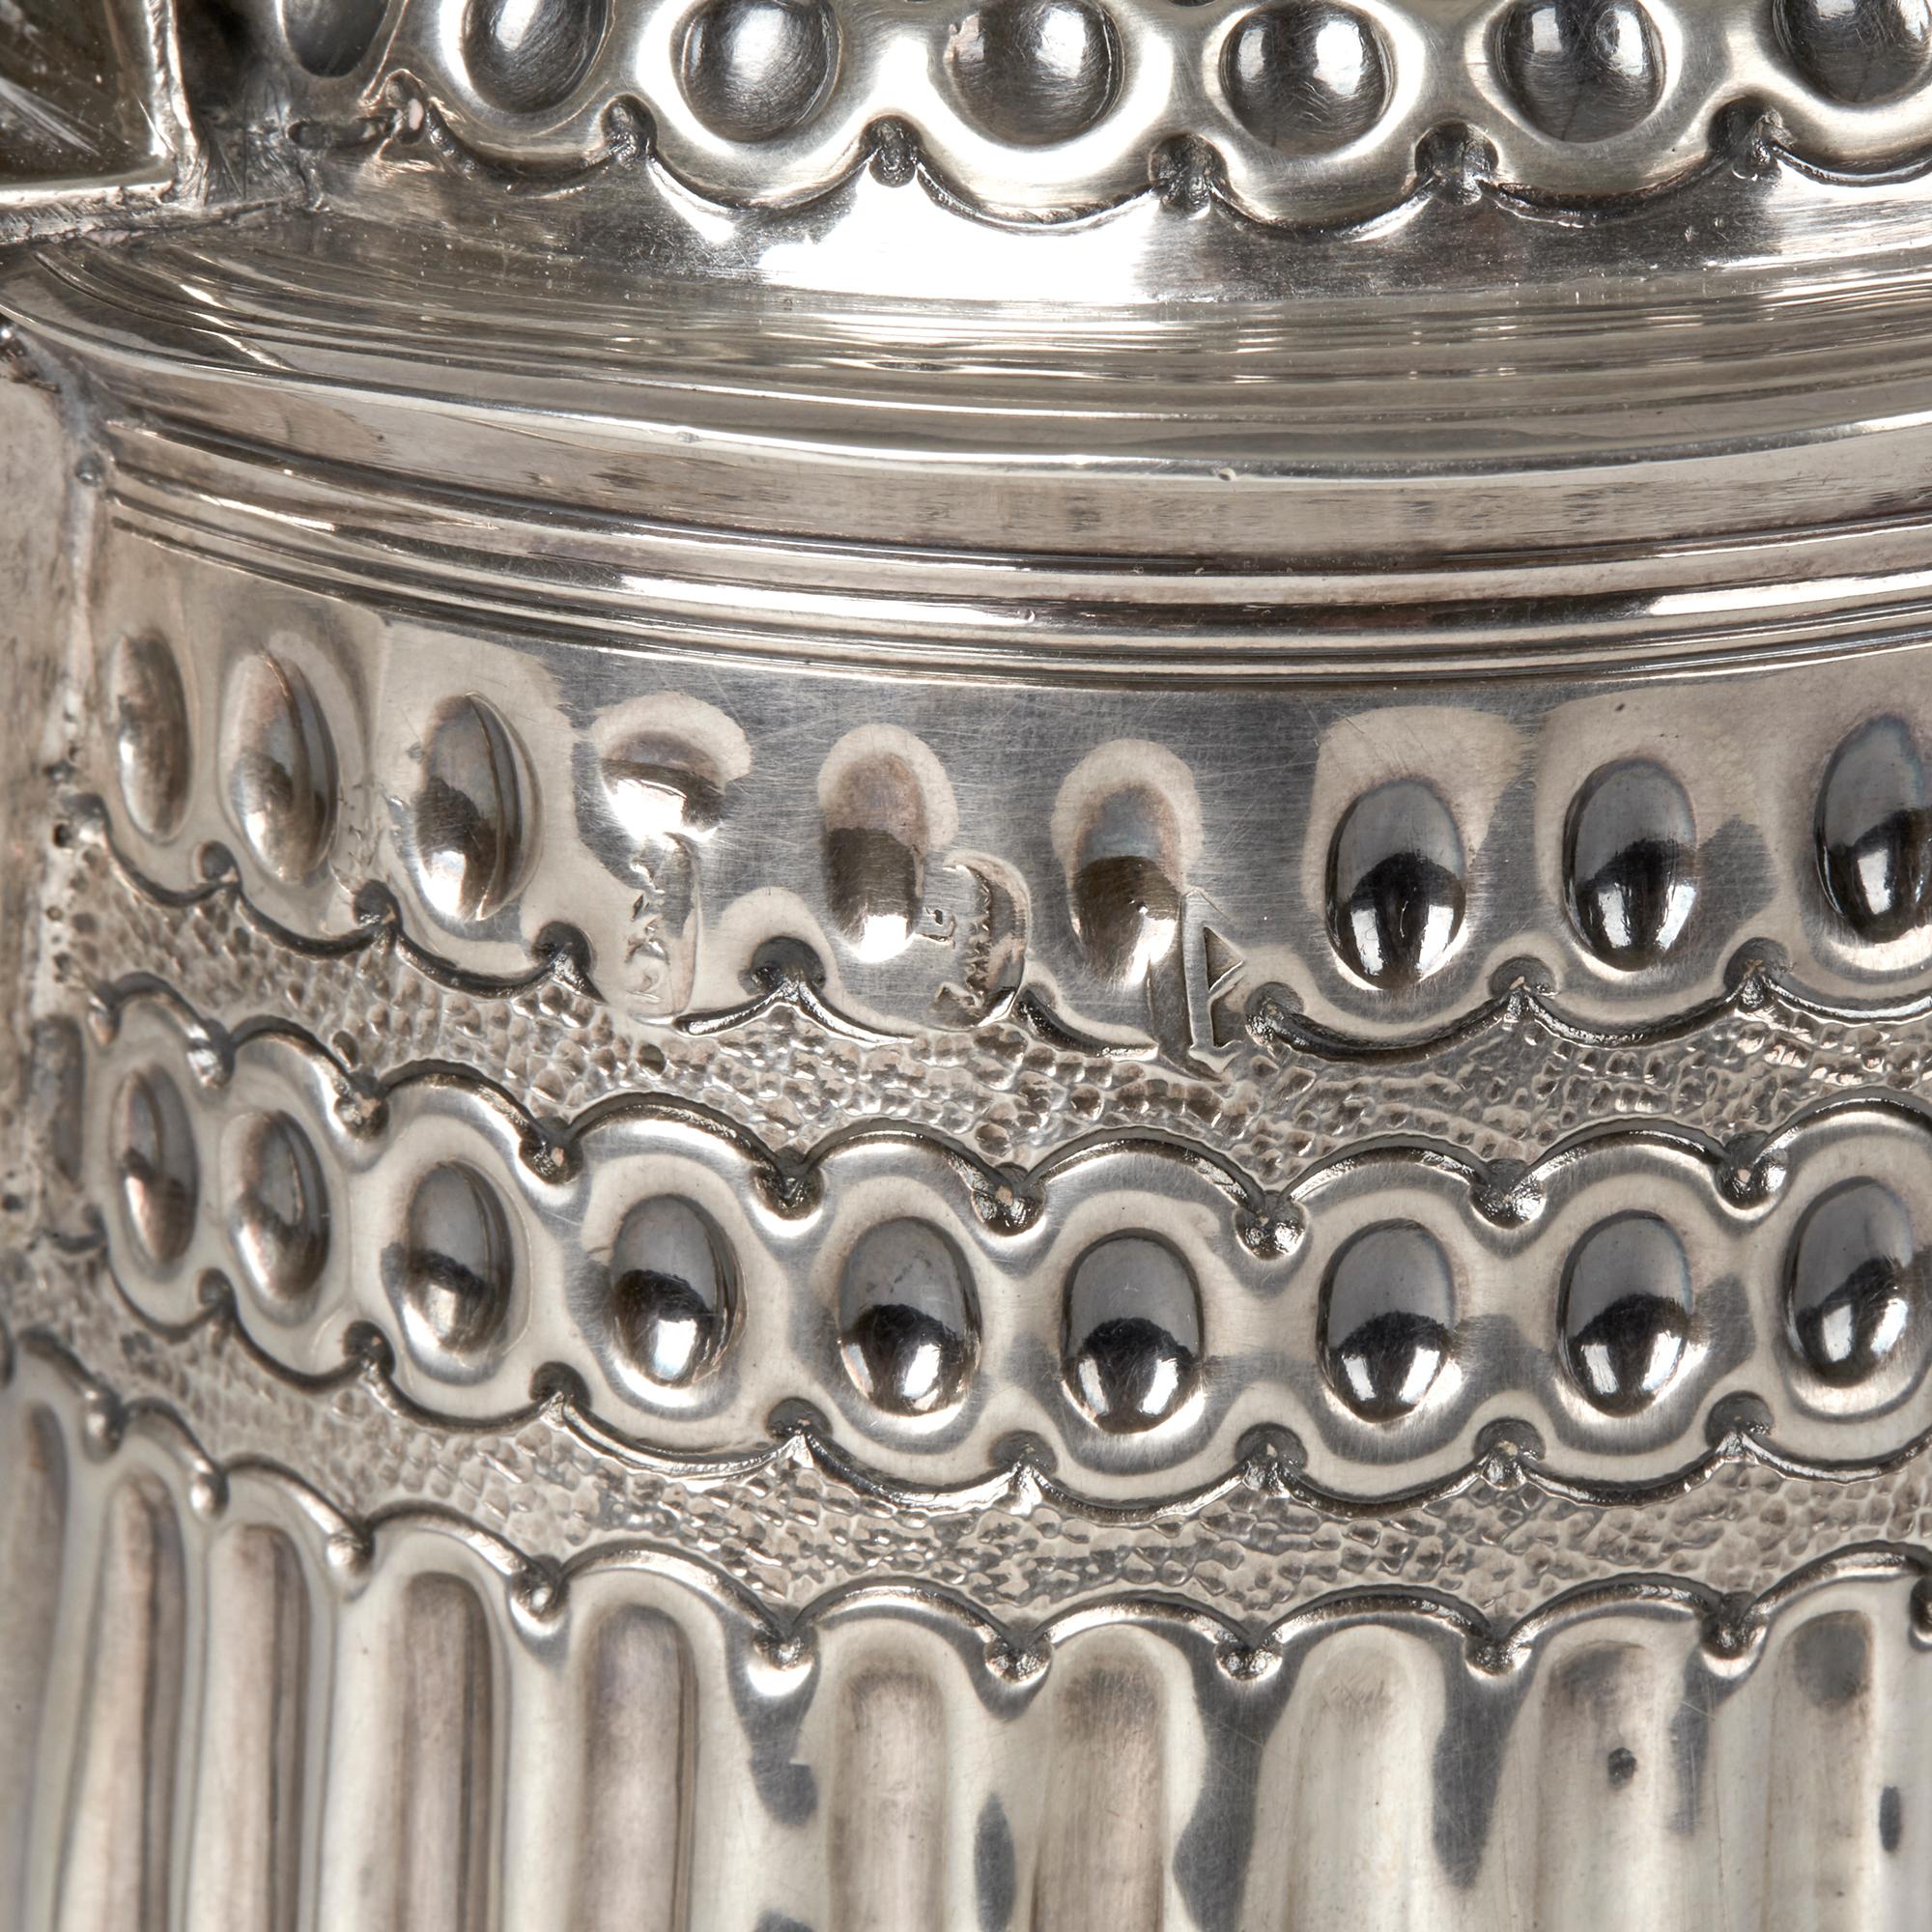 An exceptional antique Queen Anne silver lidded tankard with London silver assay marks for 1706. The tankard is lavishly decorated with a front cartouche bearing the Scottish crest for the Blane clan. The tankard is of cylindrical form with a